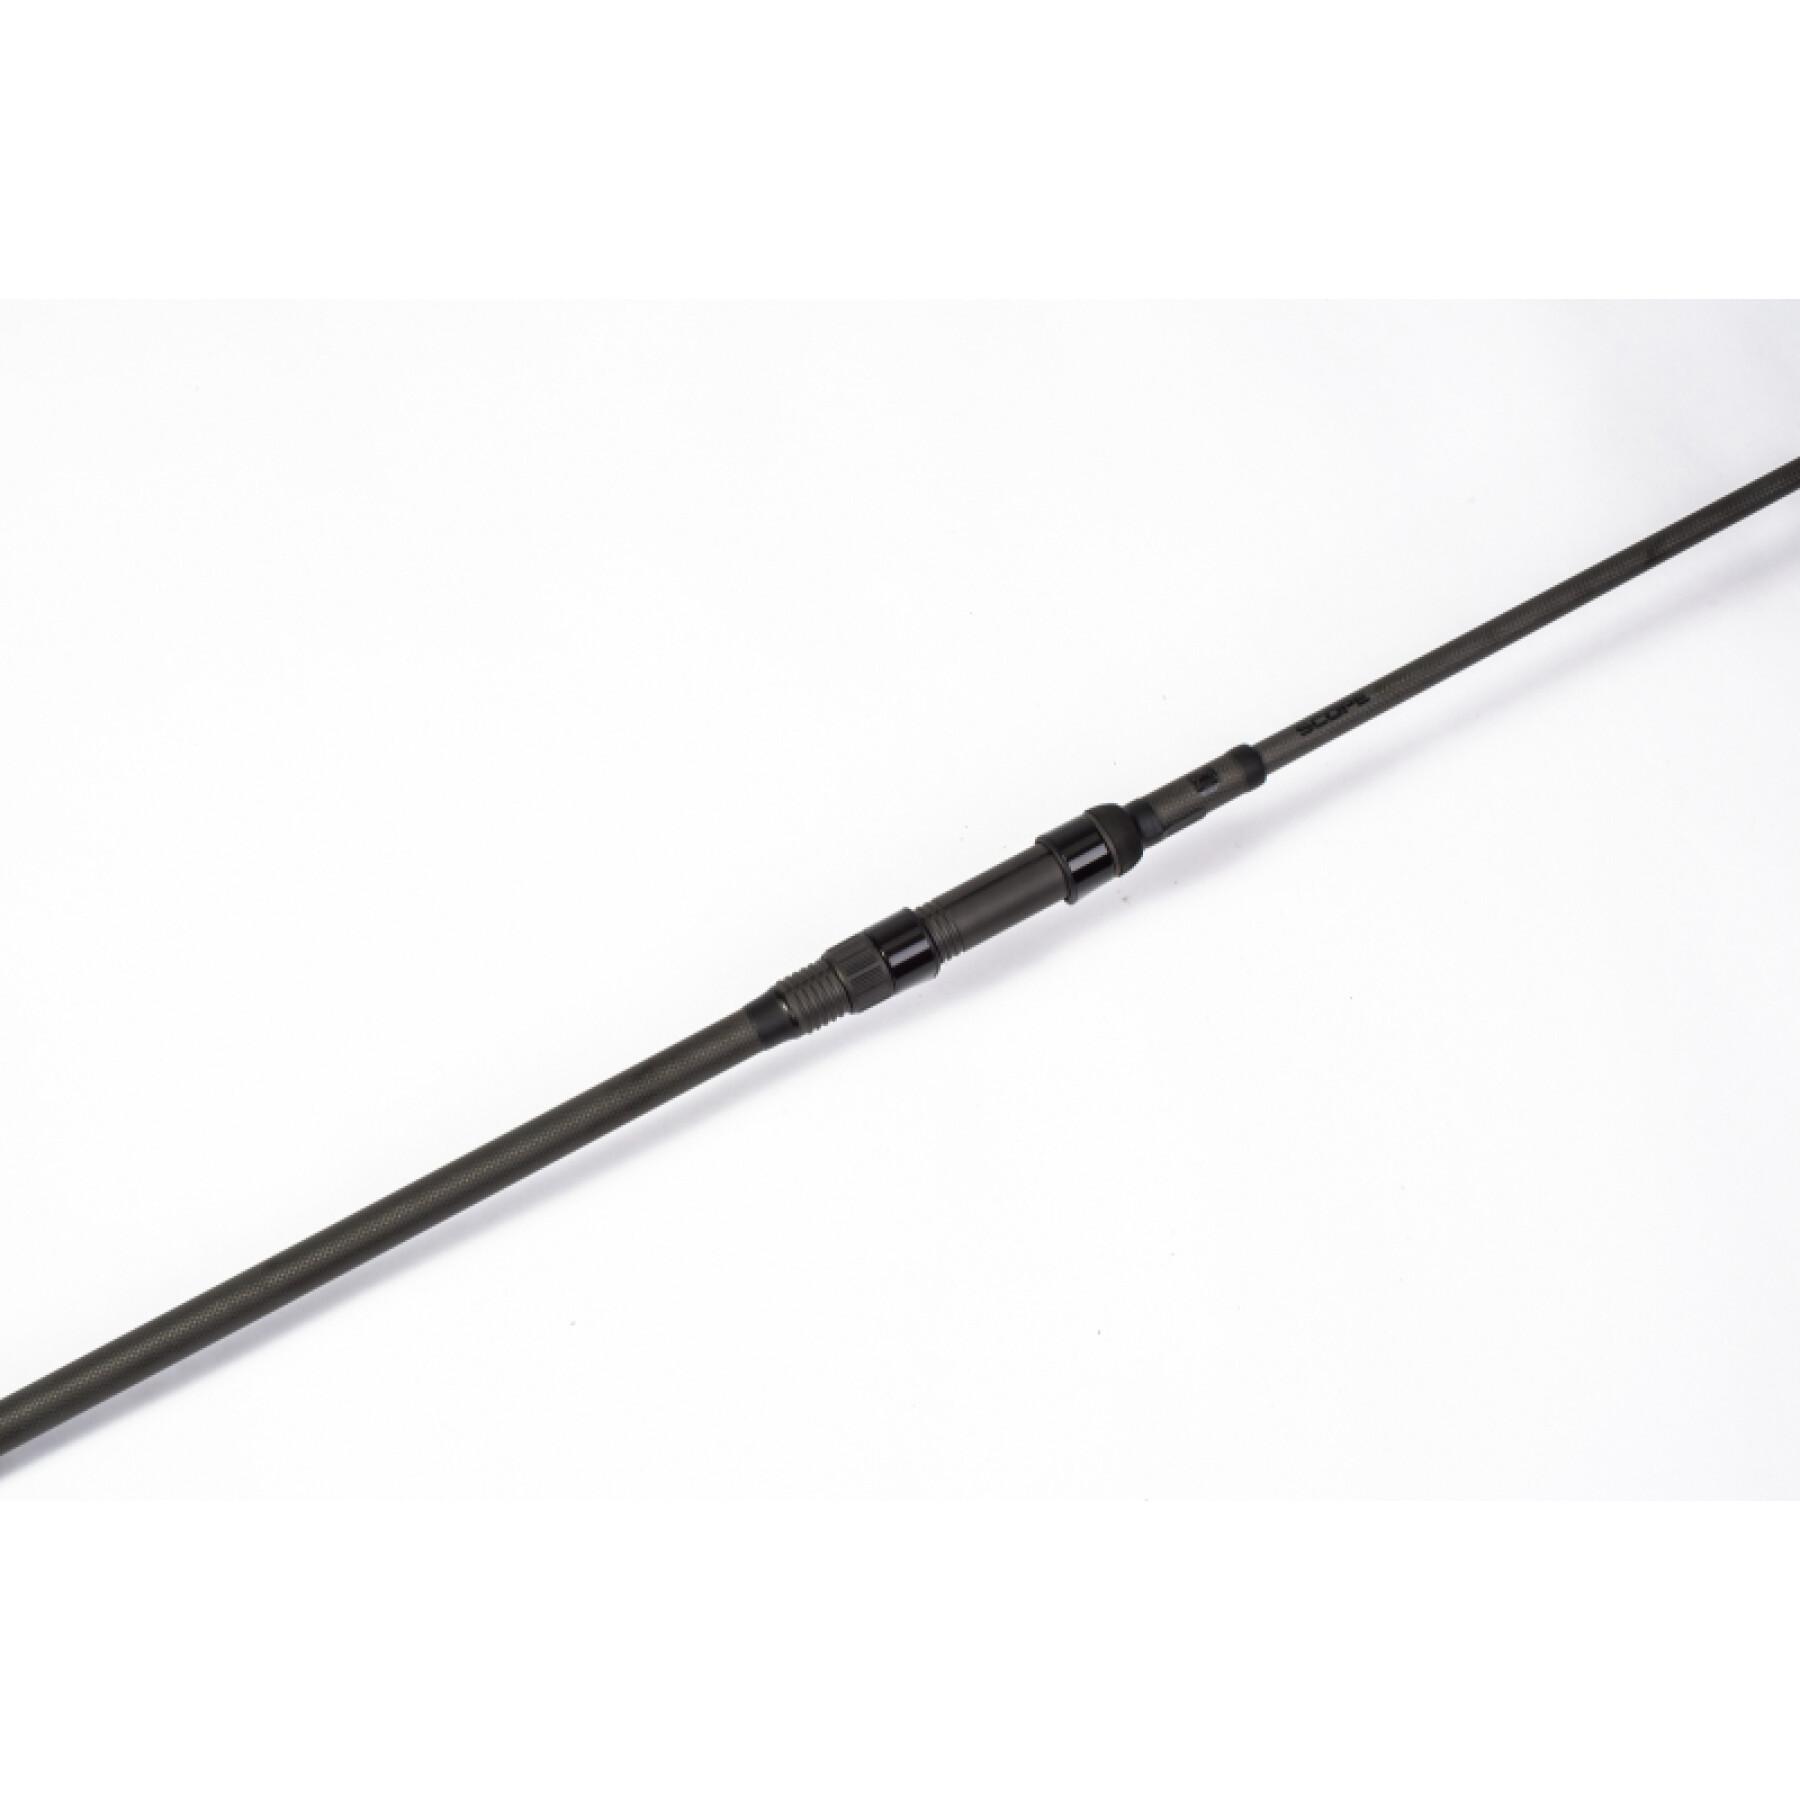 Angelrute Scope Rods Abbreviated 9ft 4.5lb